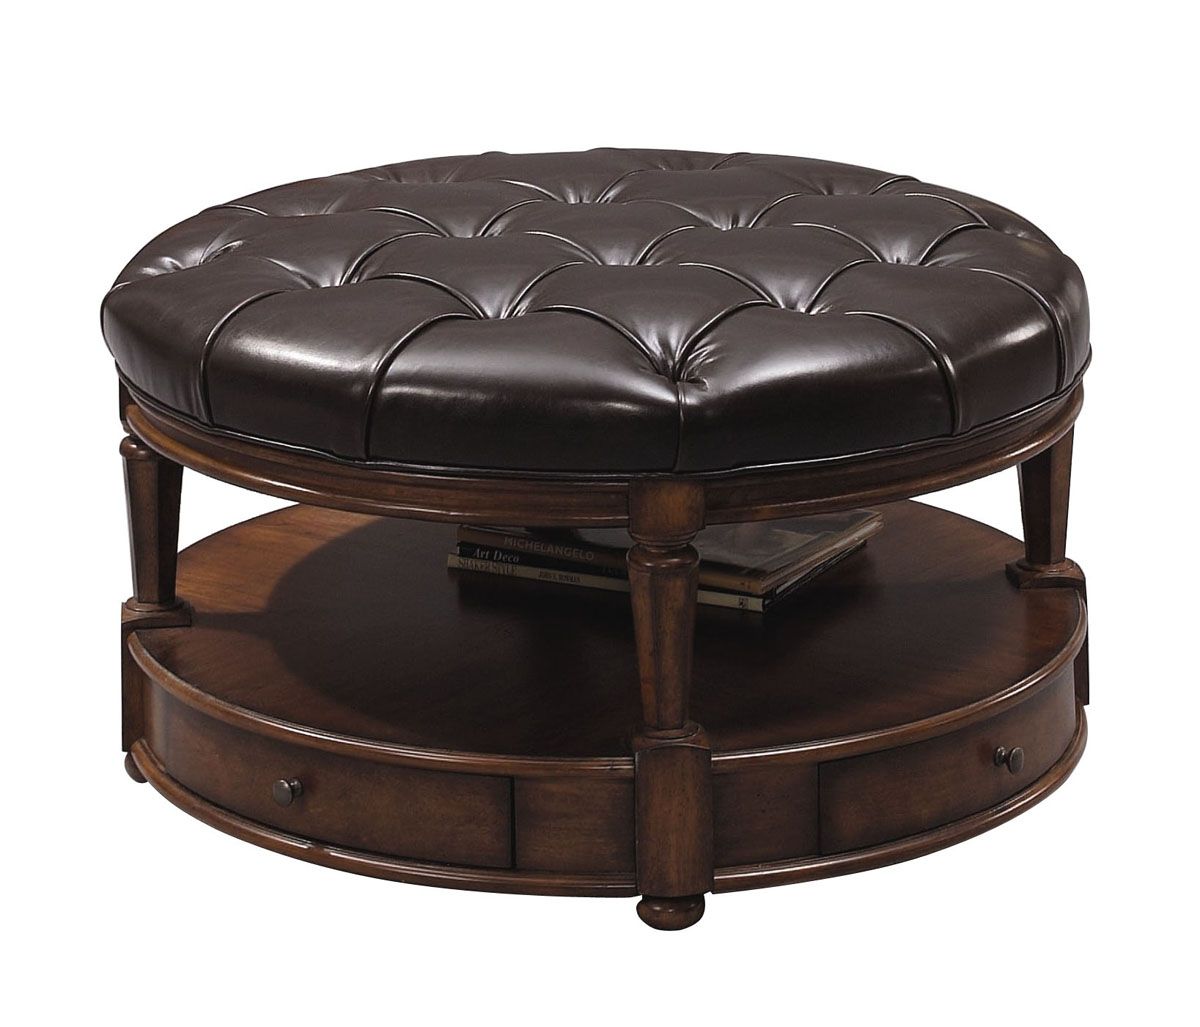 Round Coffee Table With Nesting Stools Round Coffee Table Ottoman With Storage Small Round Ottoman Coffee Table Decorate Your Living Room With Round Coffee Table (View 5 of 10)